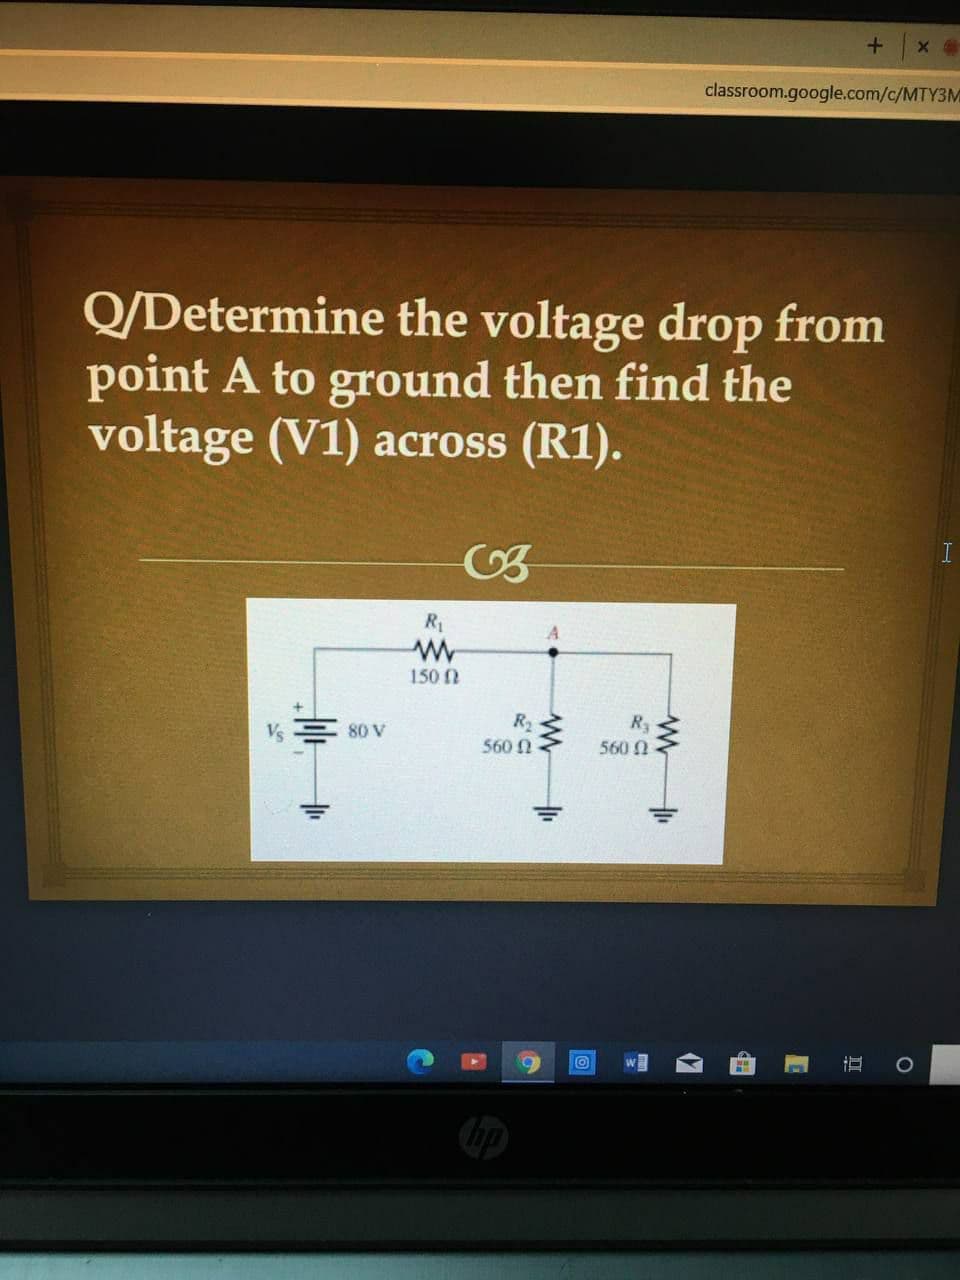 classroom.google.com/c/MTY3M
Q/Determine the voltage drop from
point A to ground then find the
voltage (V1) across (R1).
R1
150 N
R2
560 N
R3
560 0
Vs
80 V
